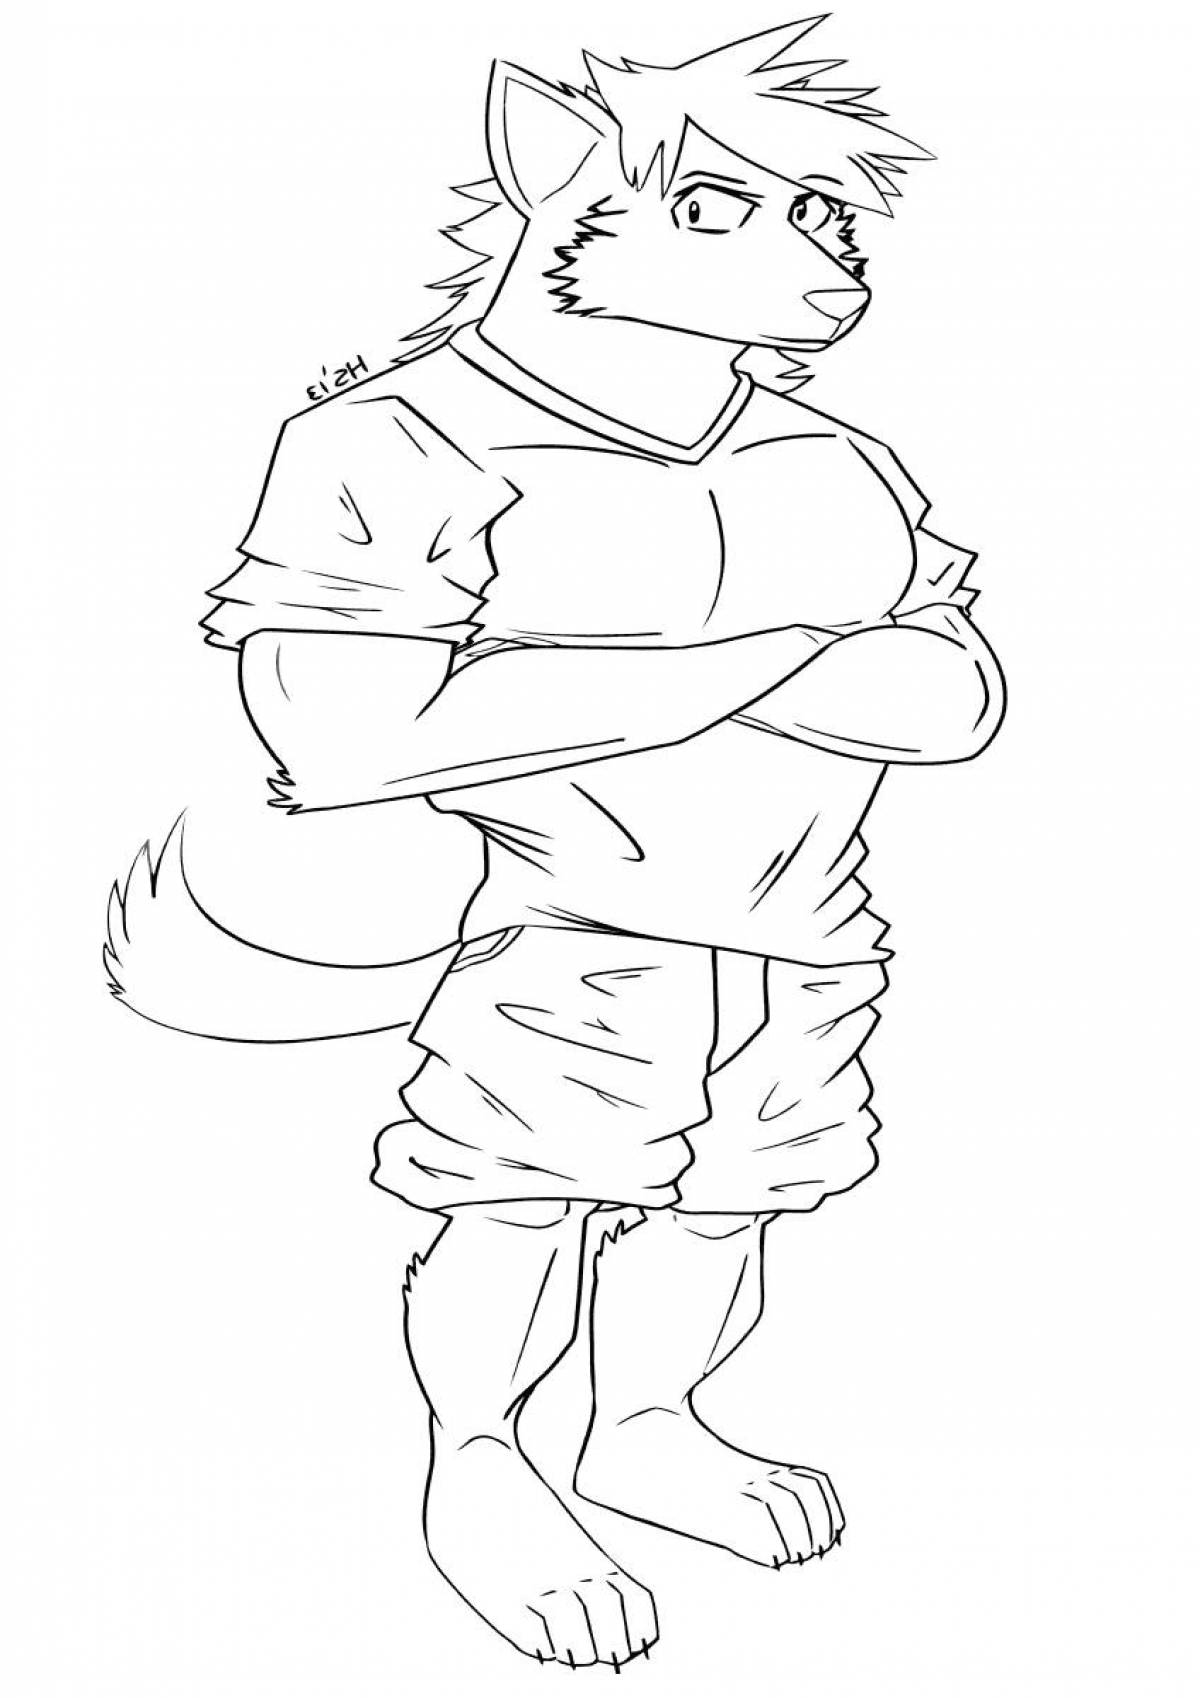 Furry in a T-shirt